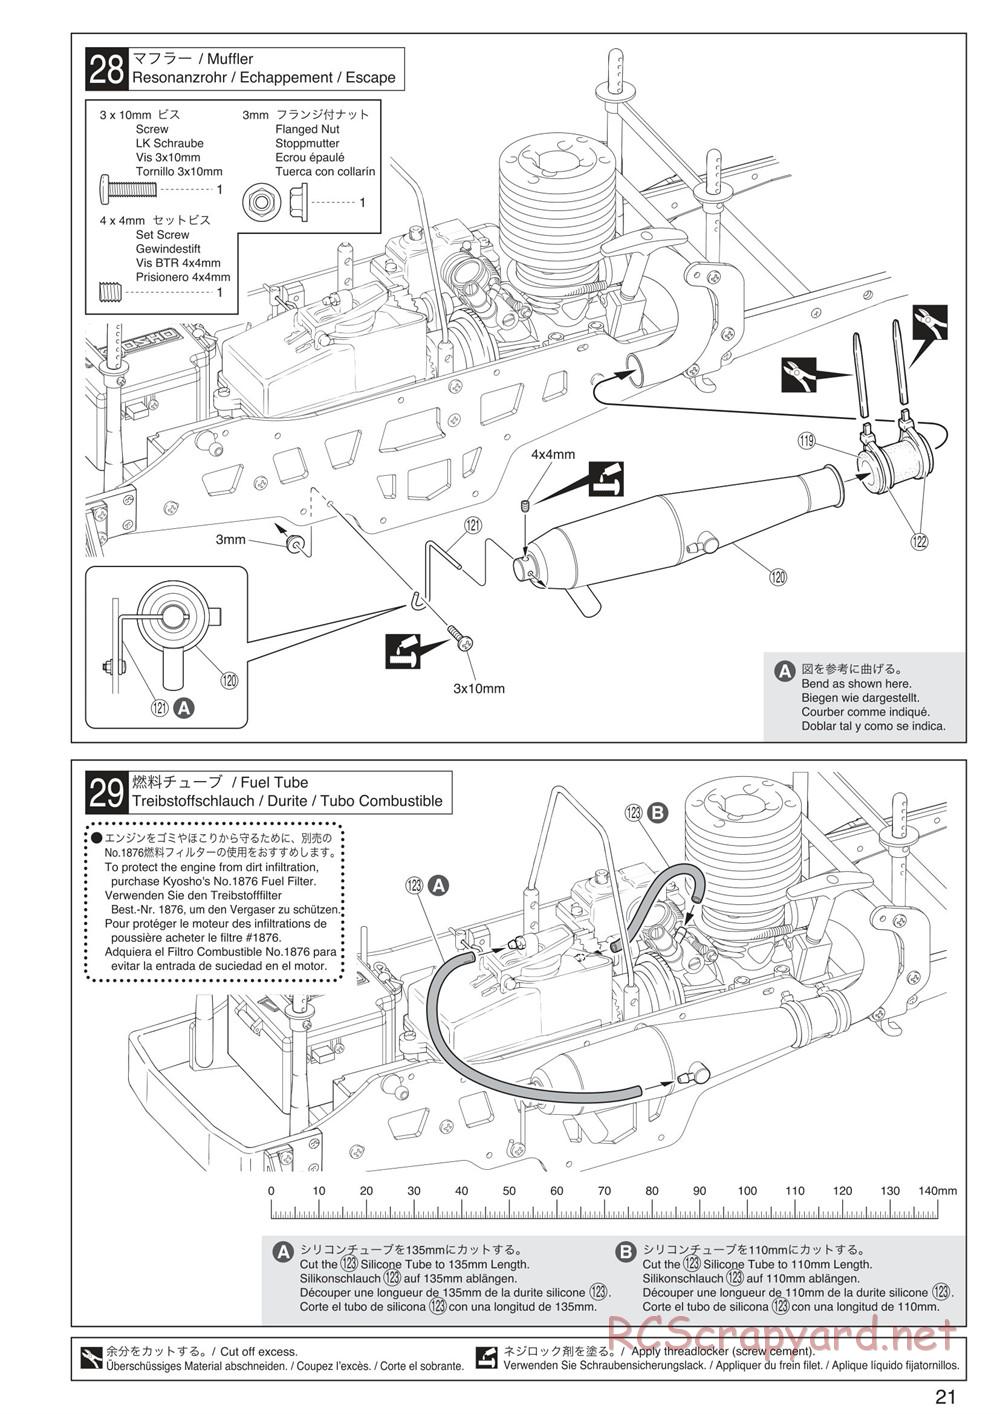 Kyosho - Mad Crusher - Manual - Page 21